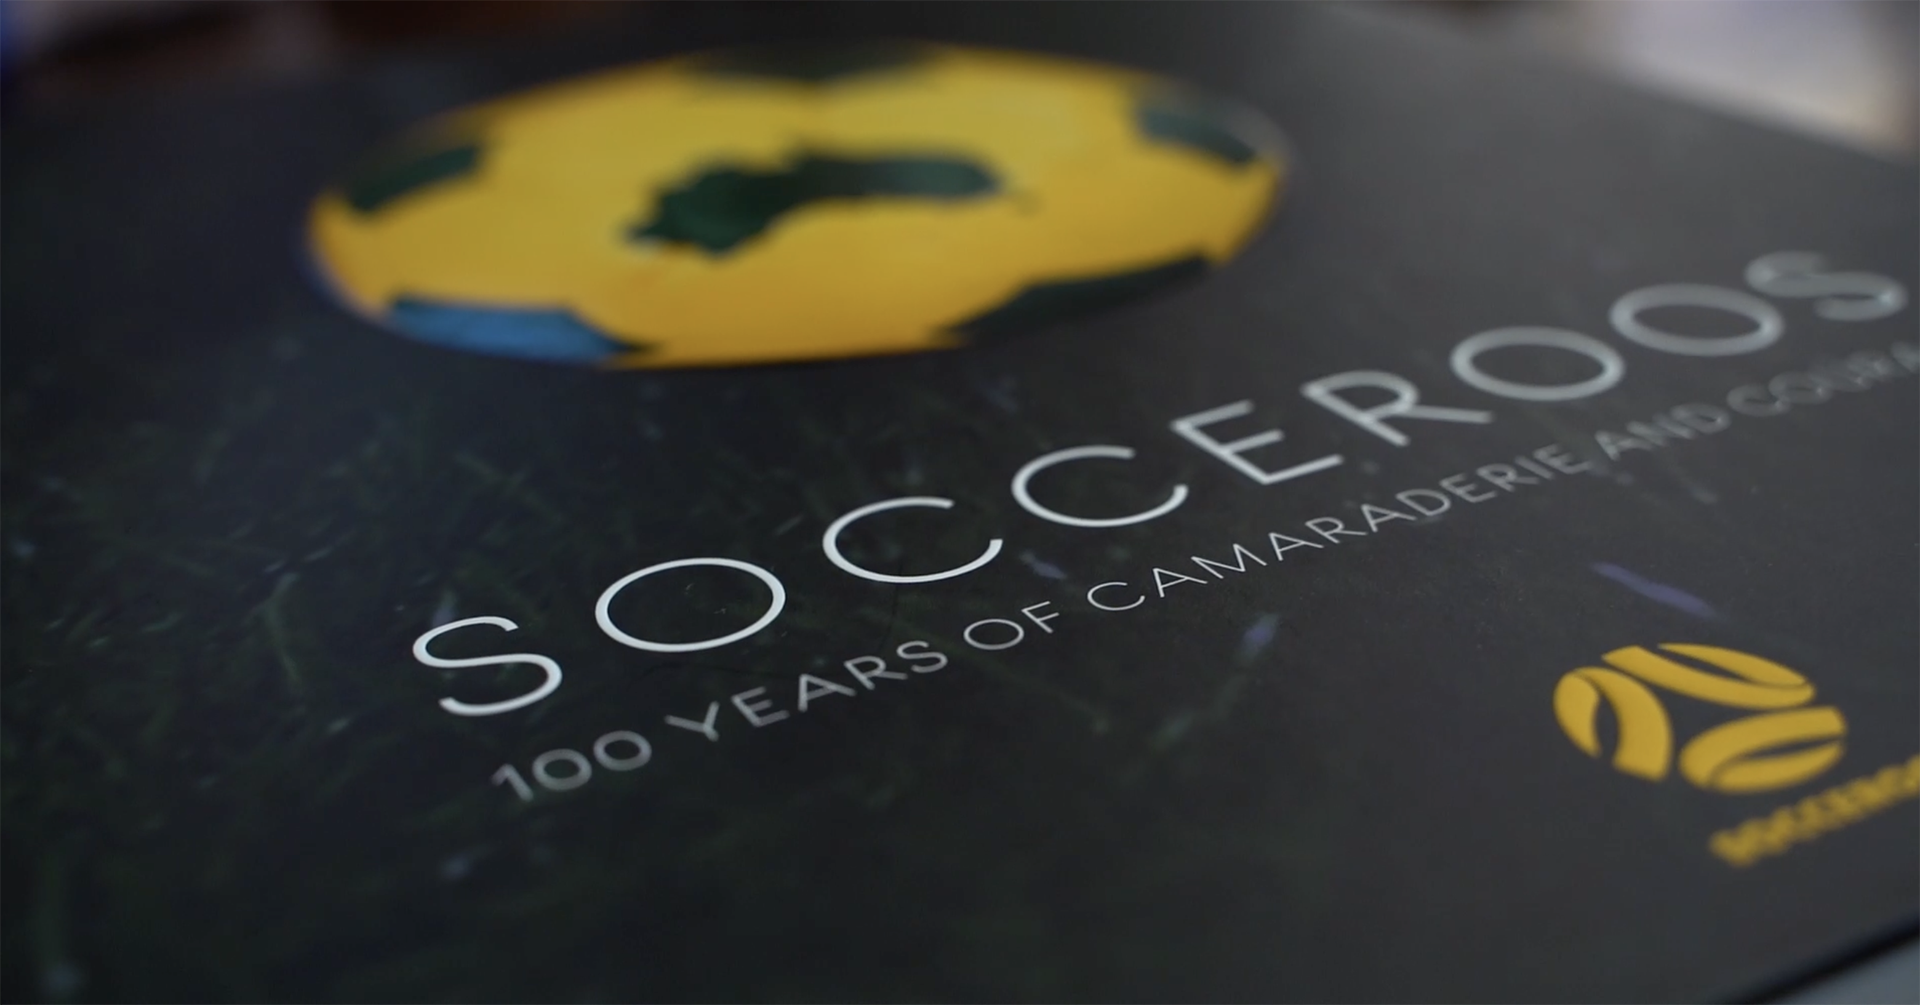 Socceroos: 100 Years of Camaraderie and Courage